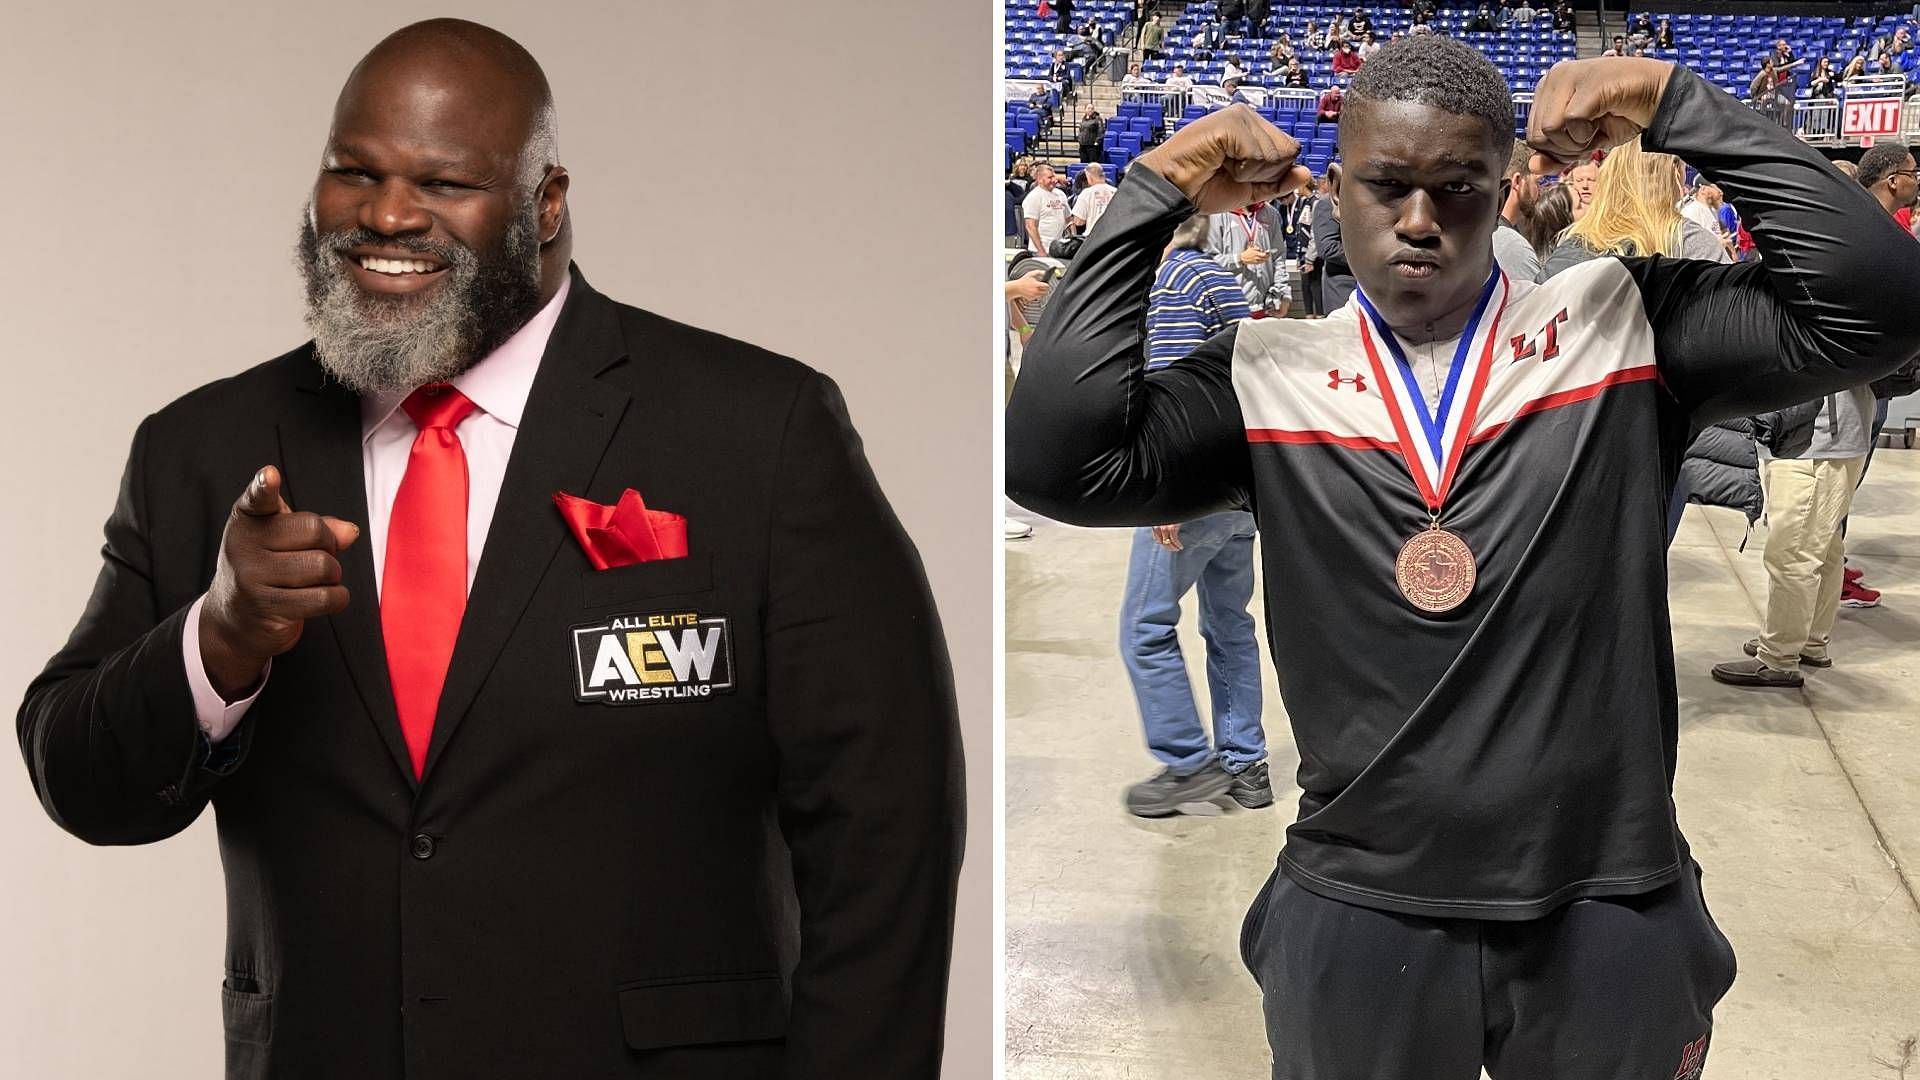 Mark Henry and Jacob Henry